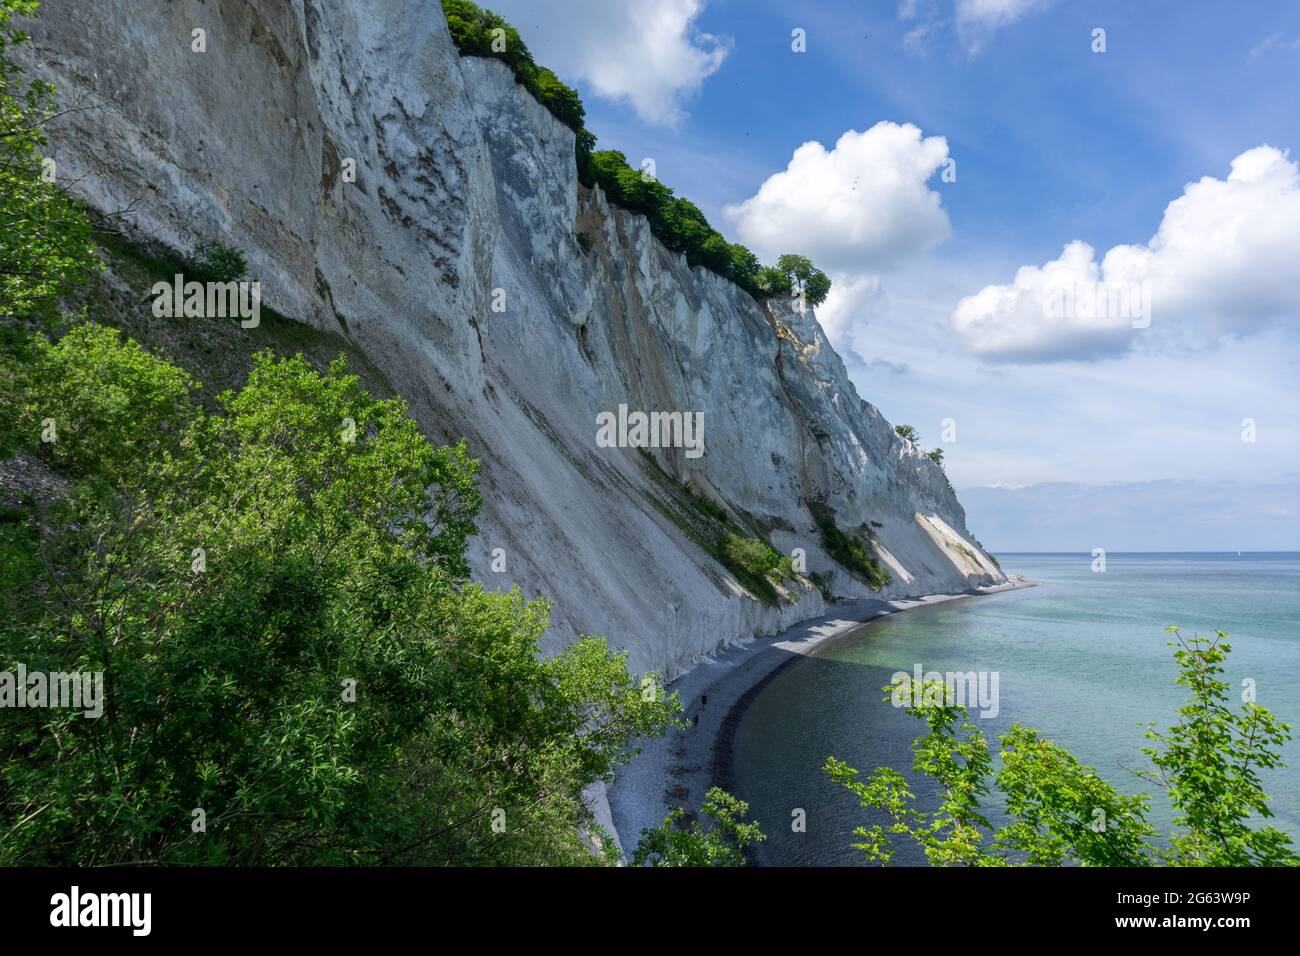 Rugged white chalkstone cliffs on  the ocean coast with lush green forest in the foreground Stock Photo